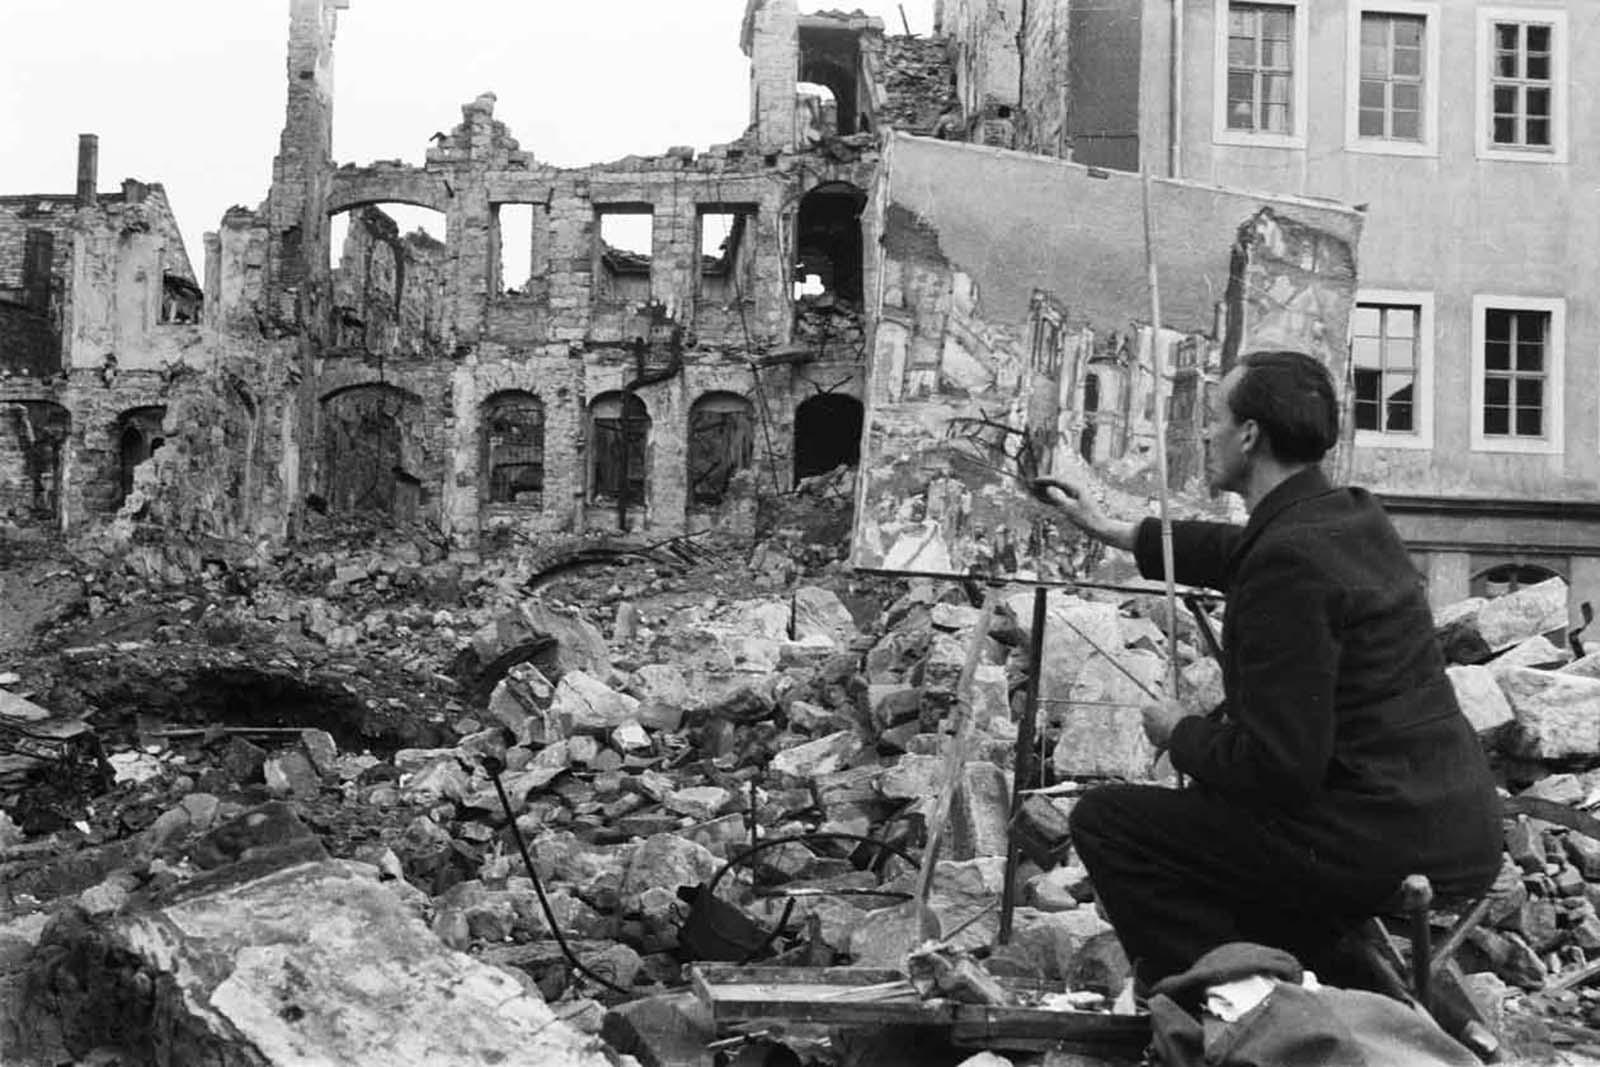 Theodor Rosenhauer in the midst of ruins in Dresden working on his oil painting “View of the Japanese Palace after the Bombing”.